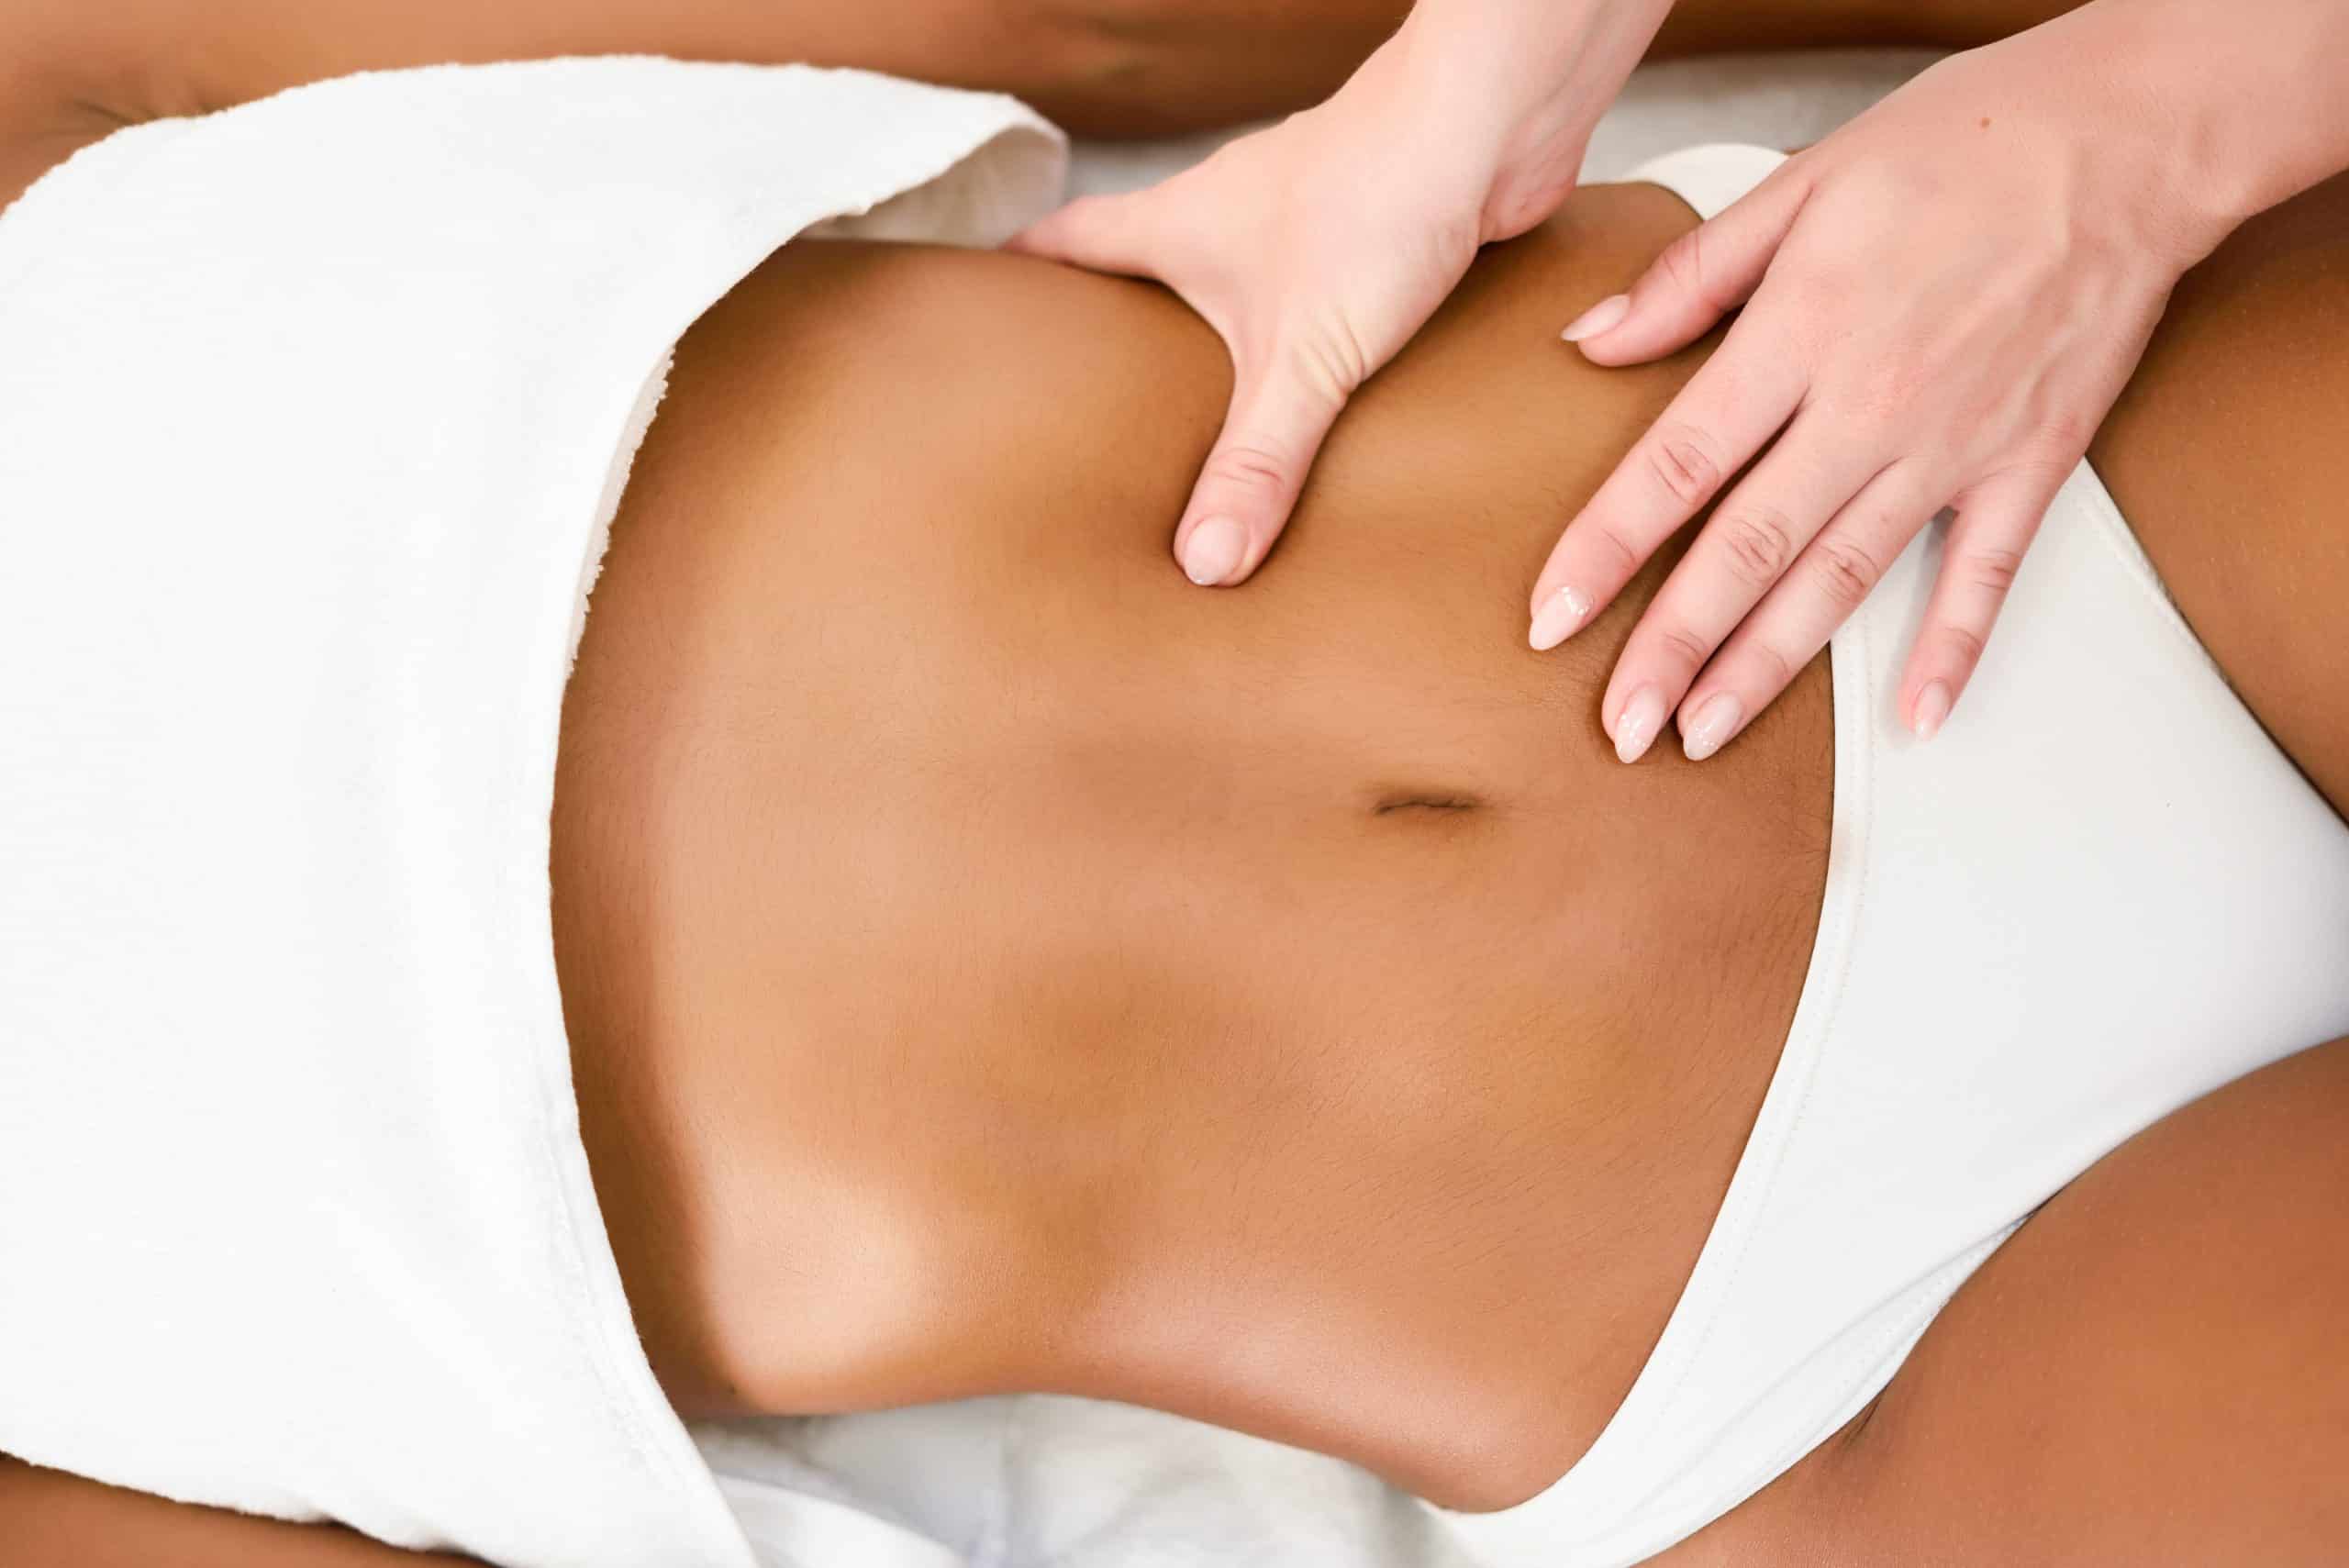 Woman receiving abdomen massage in spa wellness center. Beauty and Aesthetic concepts.